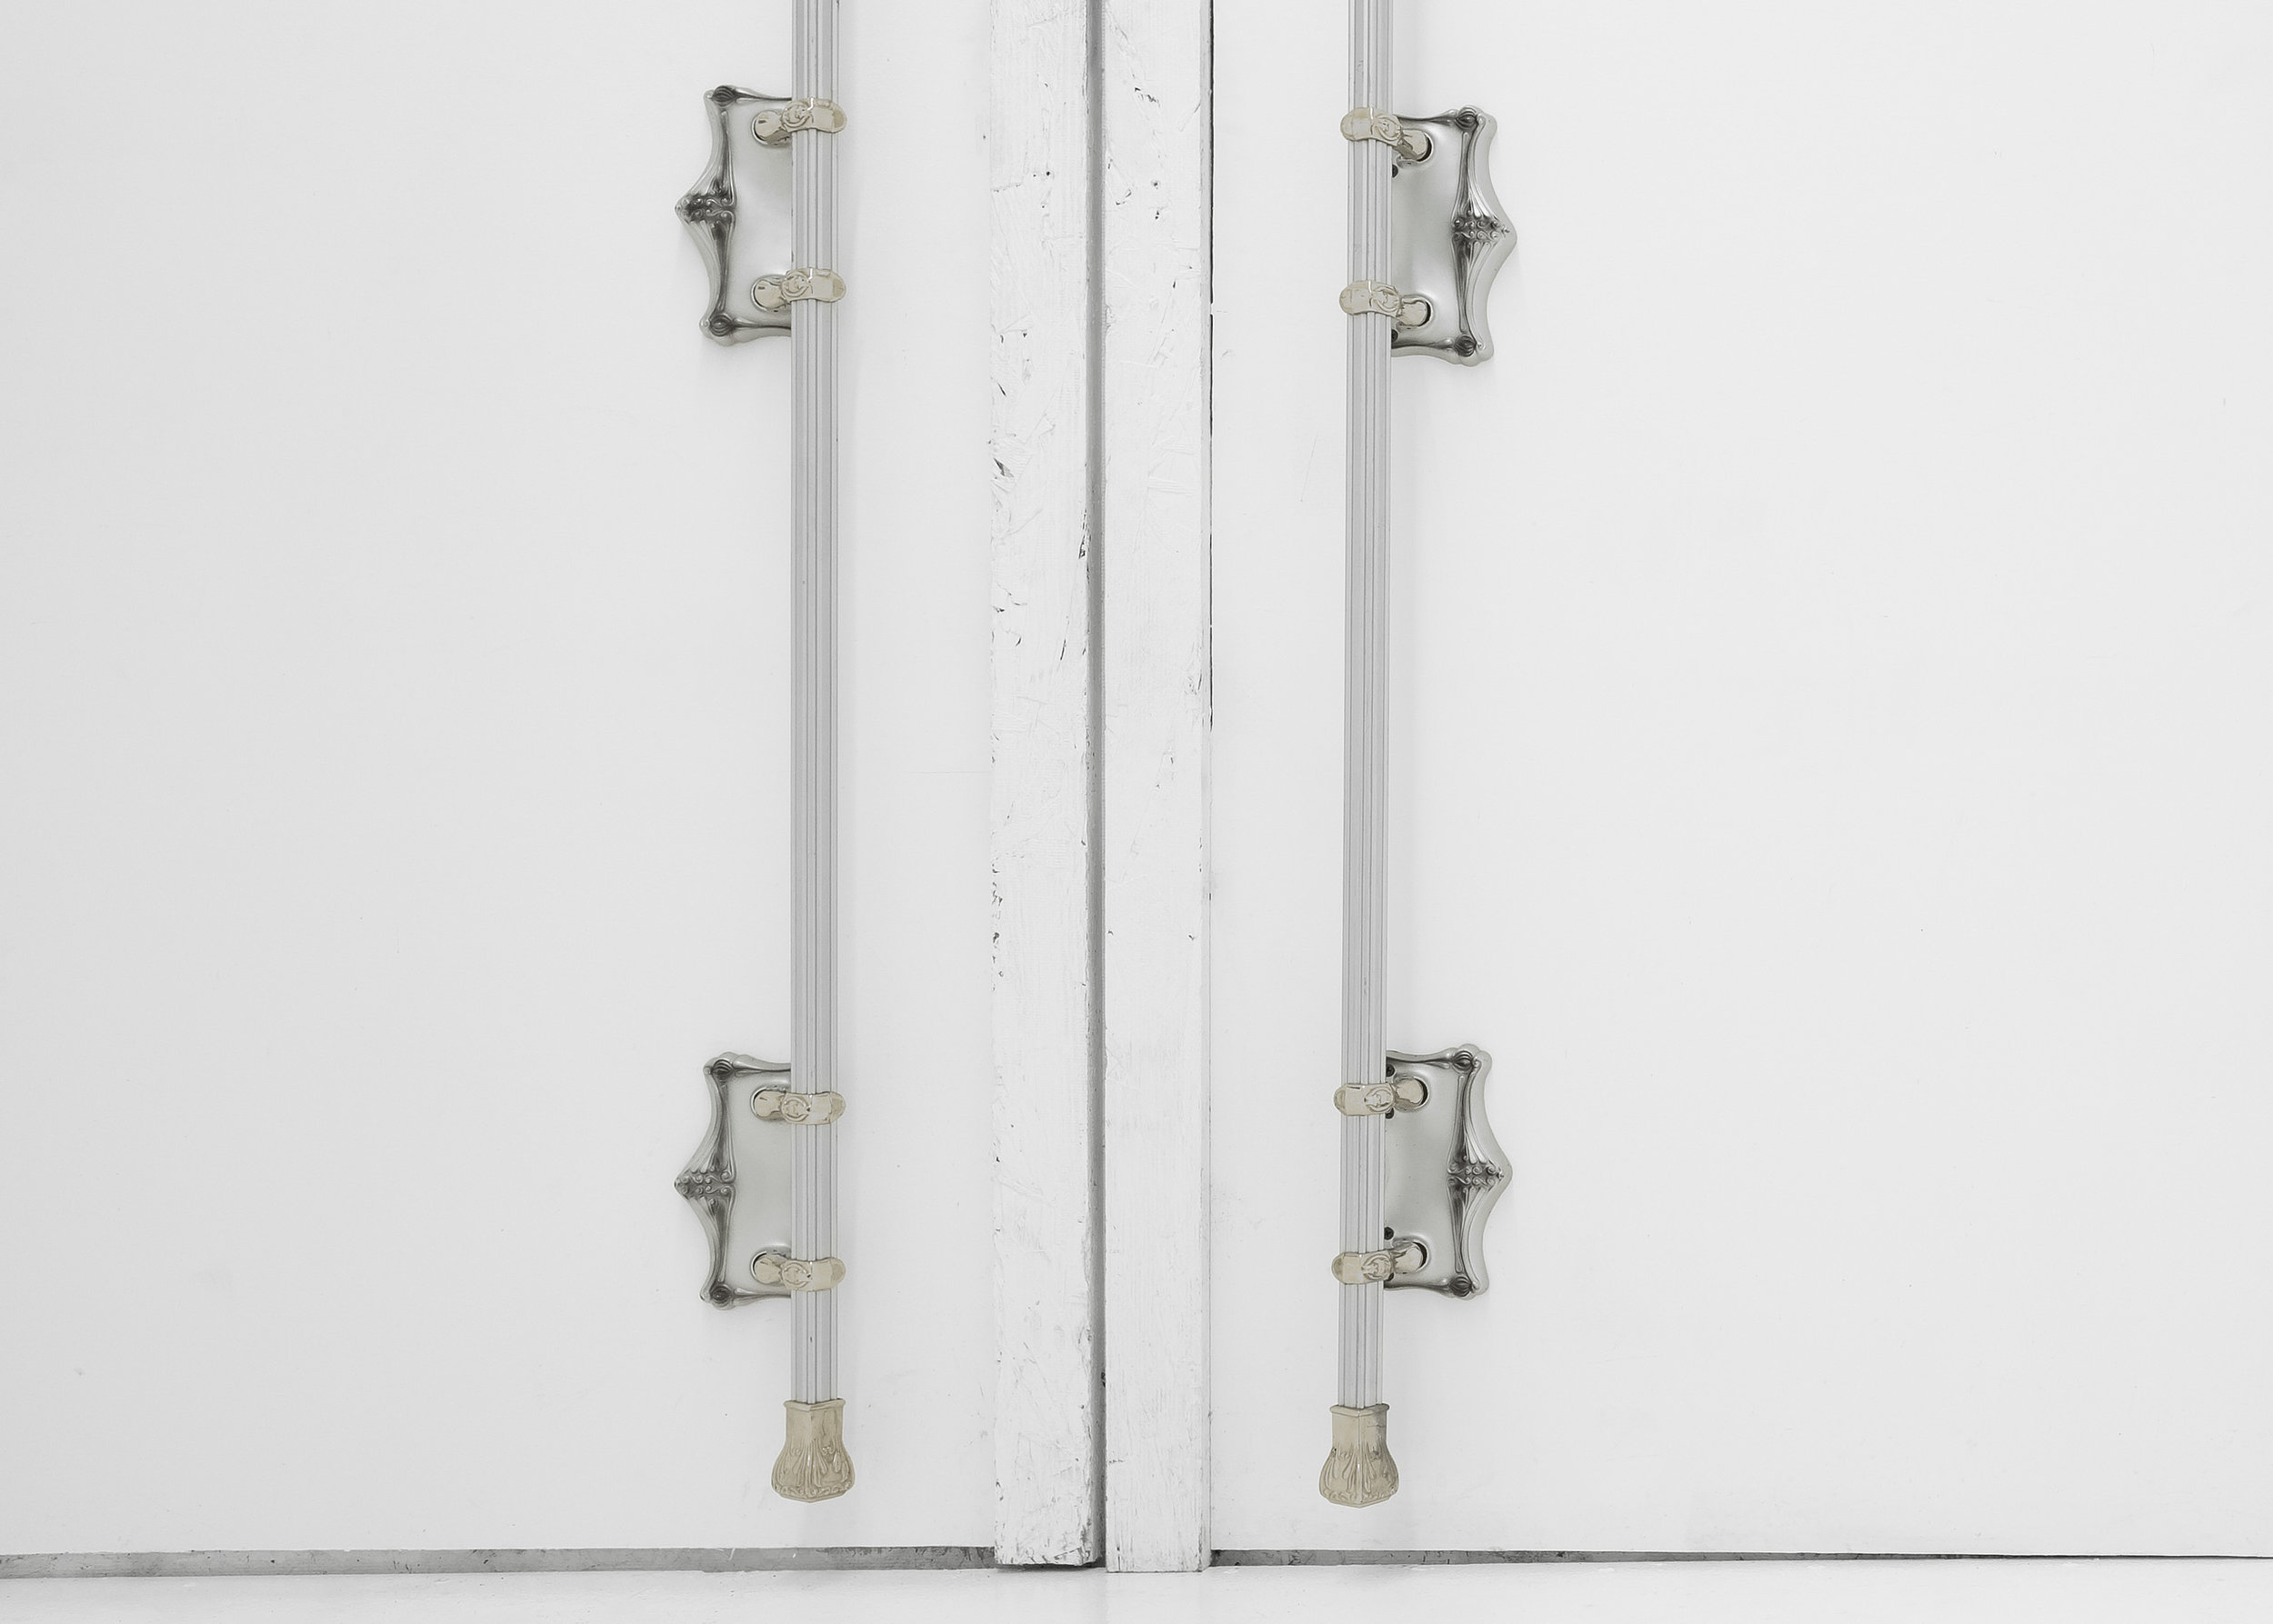  Sydney Shen,  [DATA EXPUNGED] , 2018, casket handles, dimensions variable 